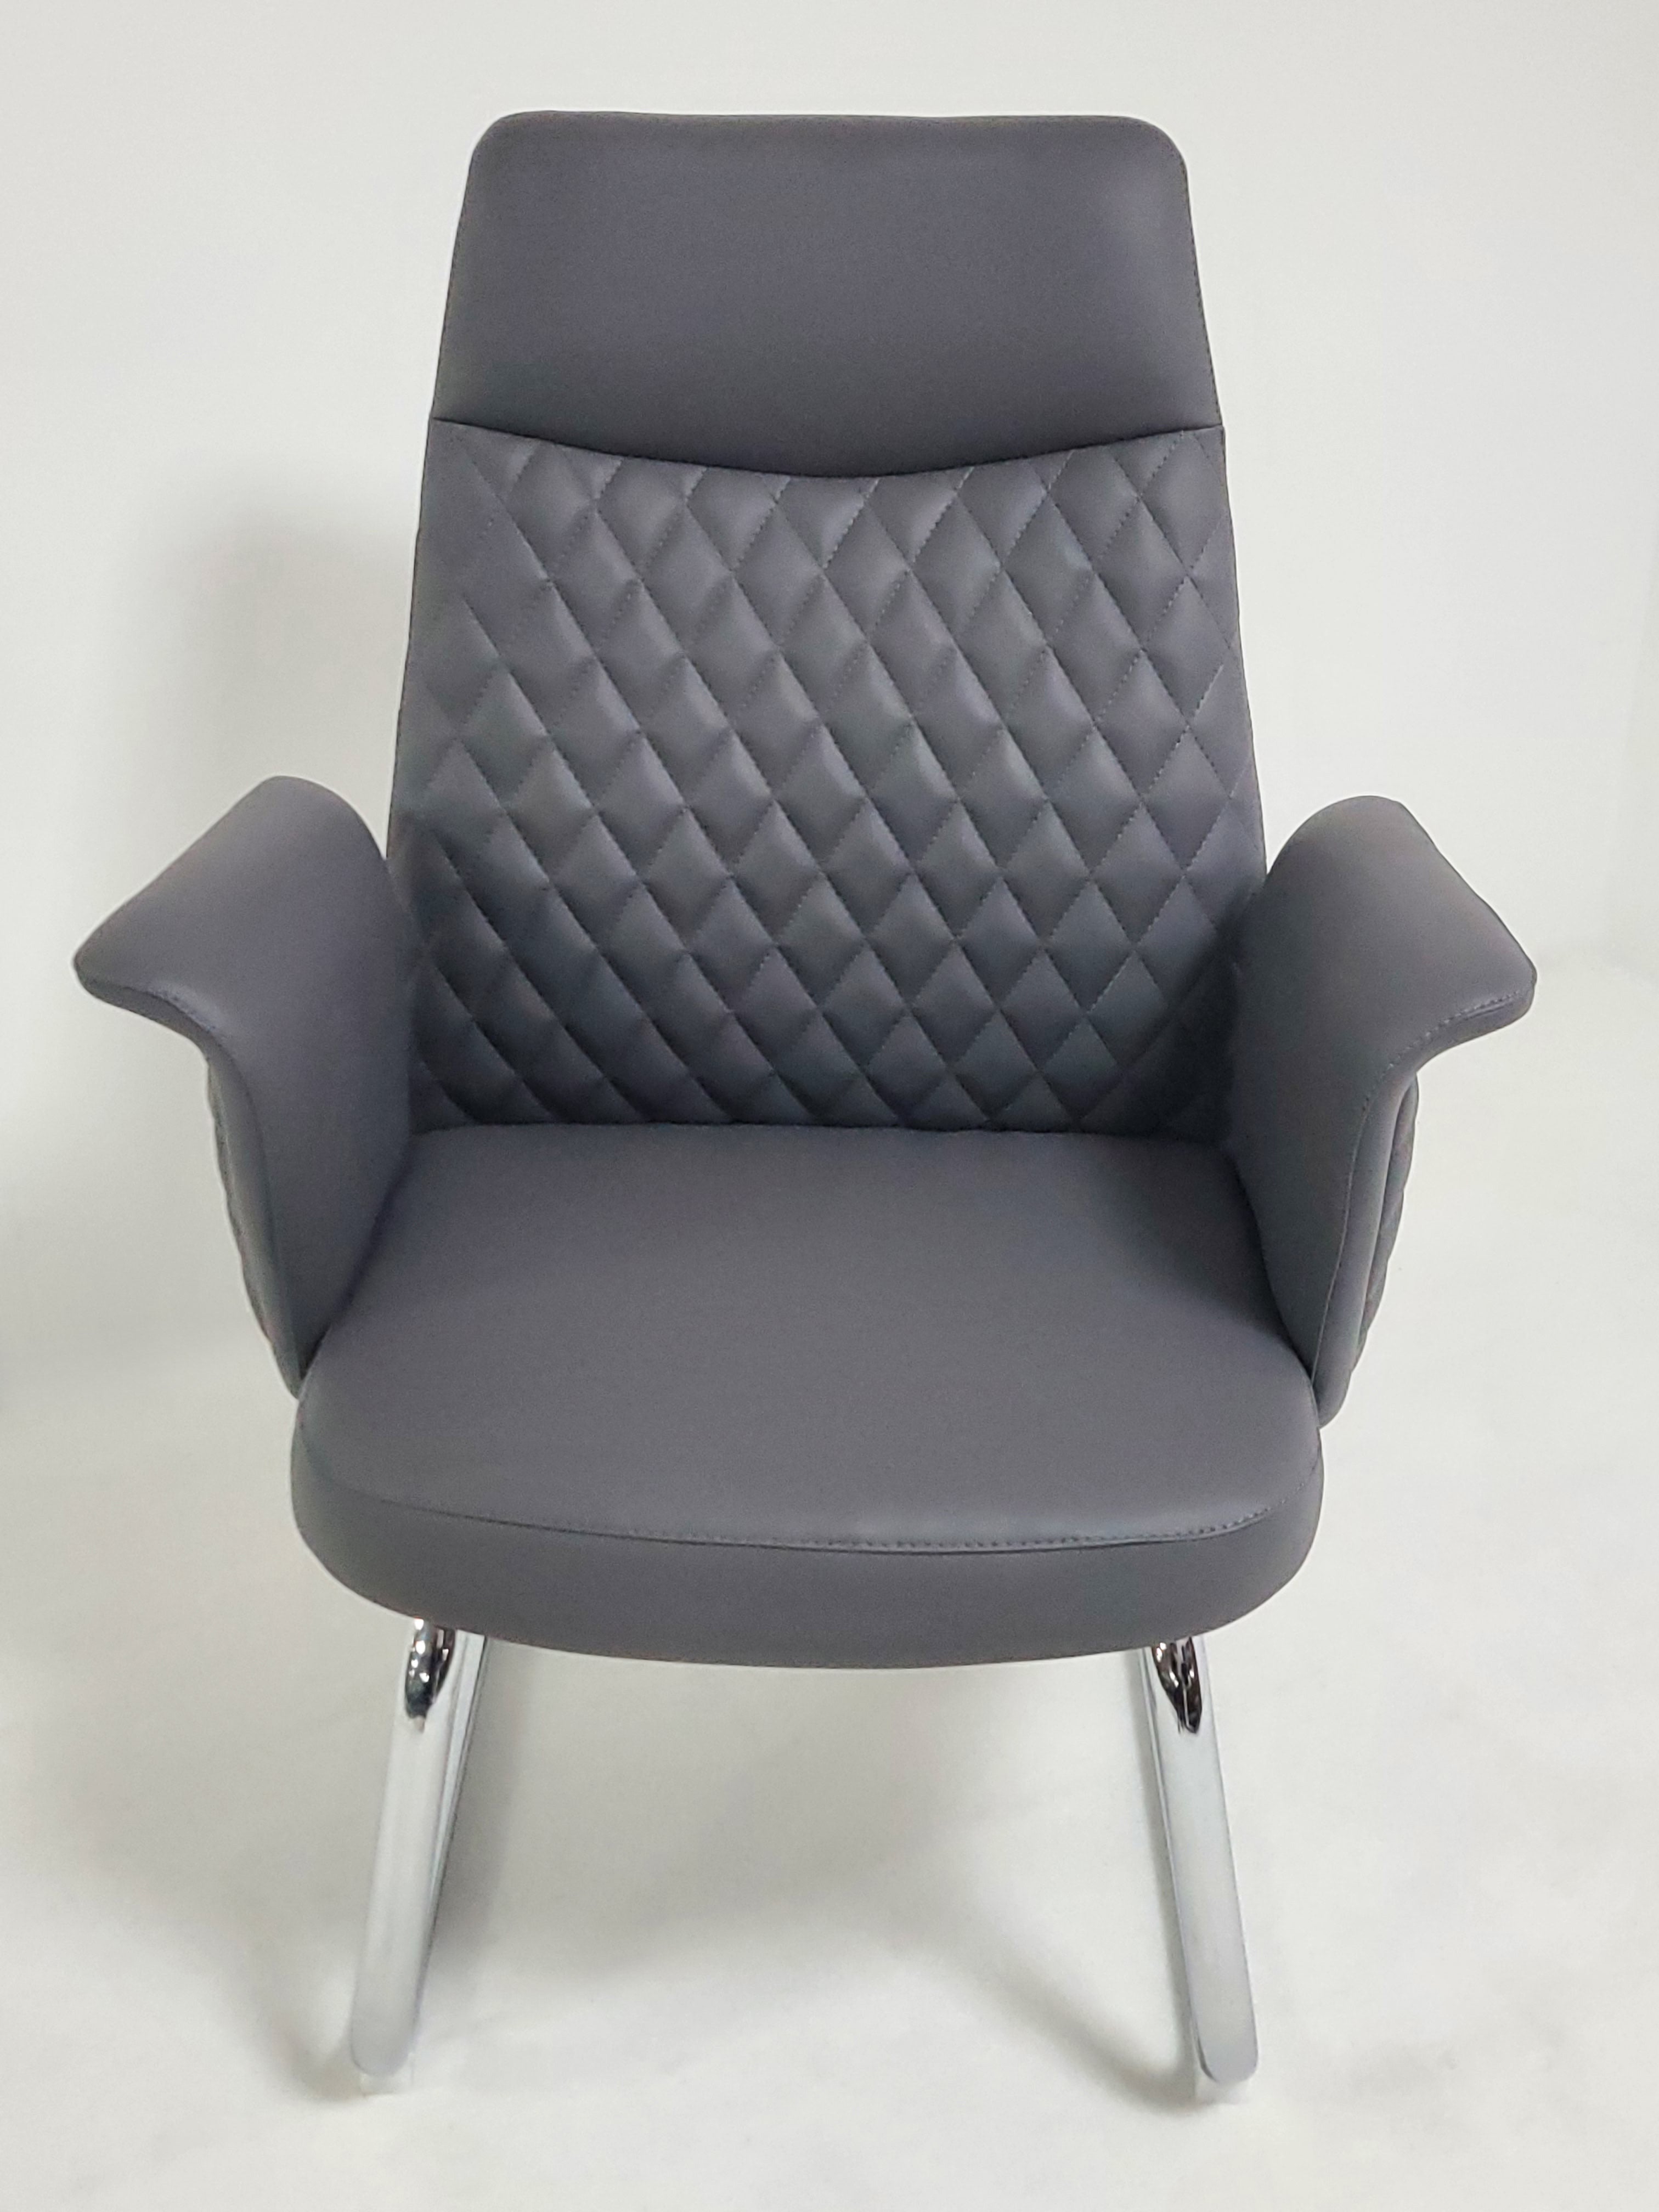 Modern Grey Leather Meeting Room Chair with Winged Arm - DL2915C